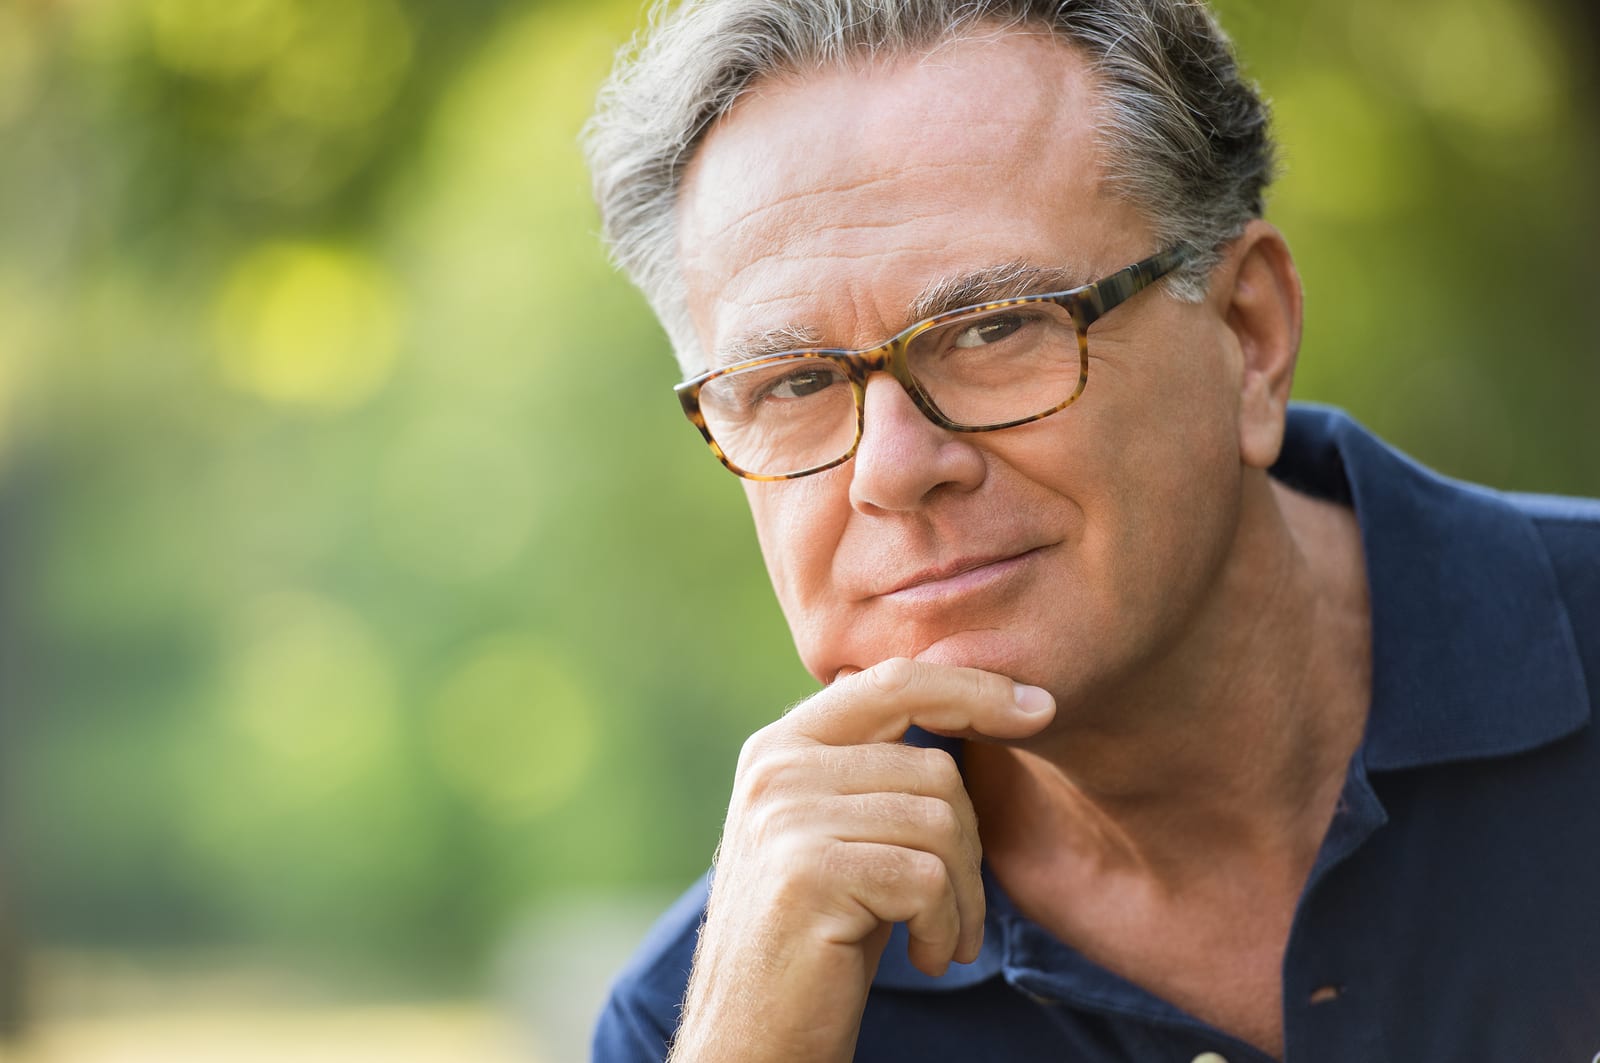 Older man thinking about purchasing hearing aids